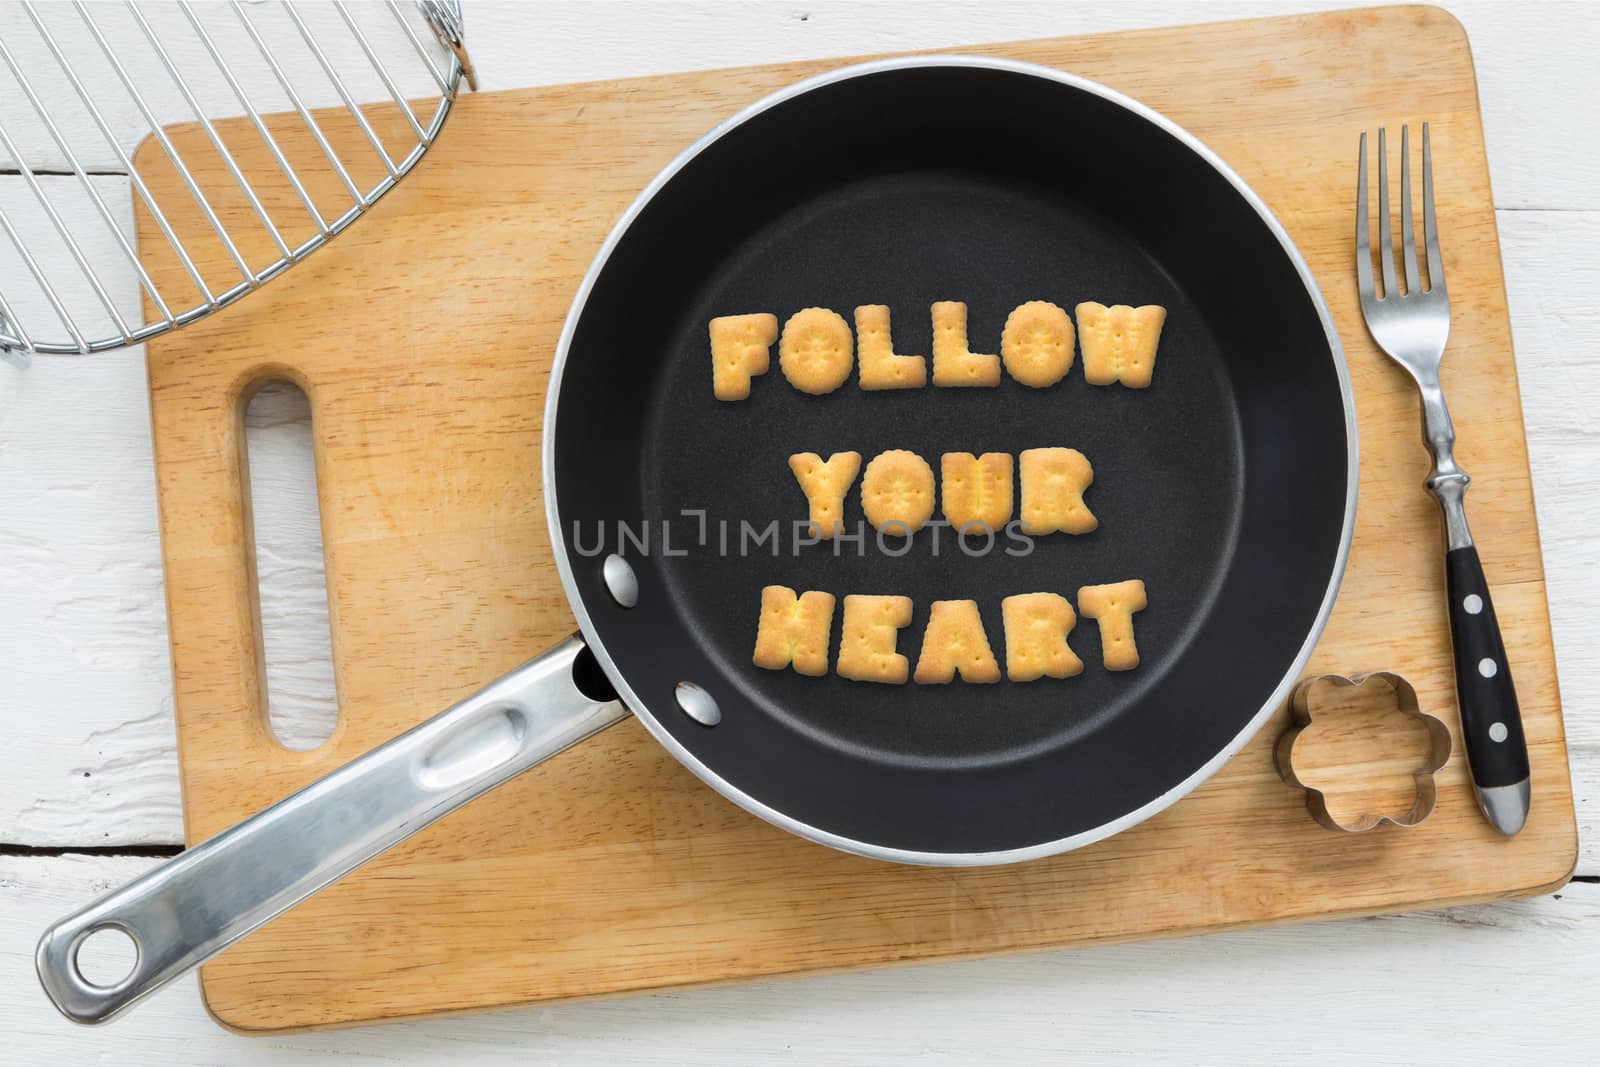 Top view of letter collage made of biscuits. Quote FOLLOW YOUR HEART putting in black frying pan. Other cooking equipments: fork, cookie cutter and chopping board putting on white wooden table, vintage style image.